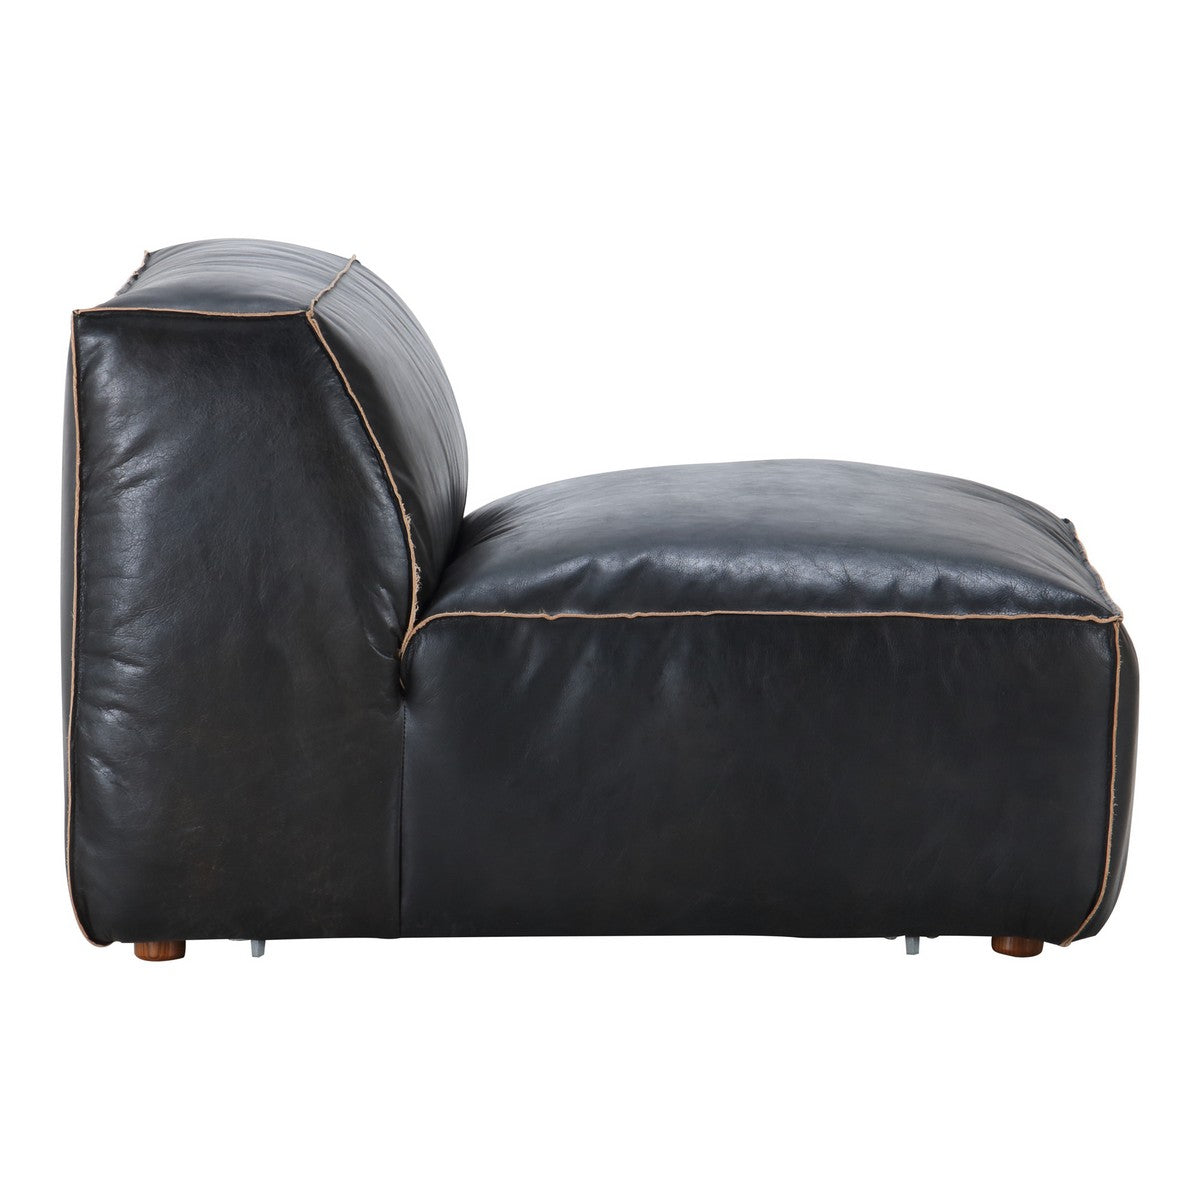 Moe's Home Collection Luxe Slipper Chair Antique Black - QN-1019-01